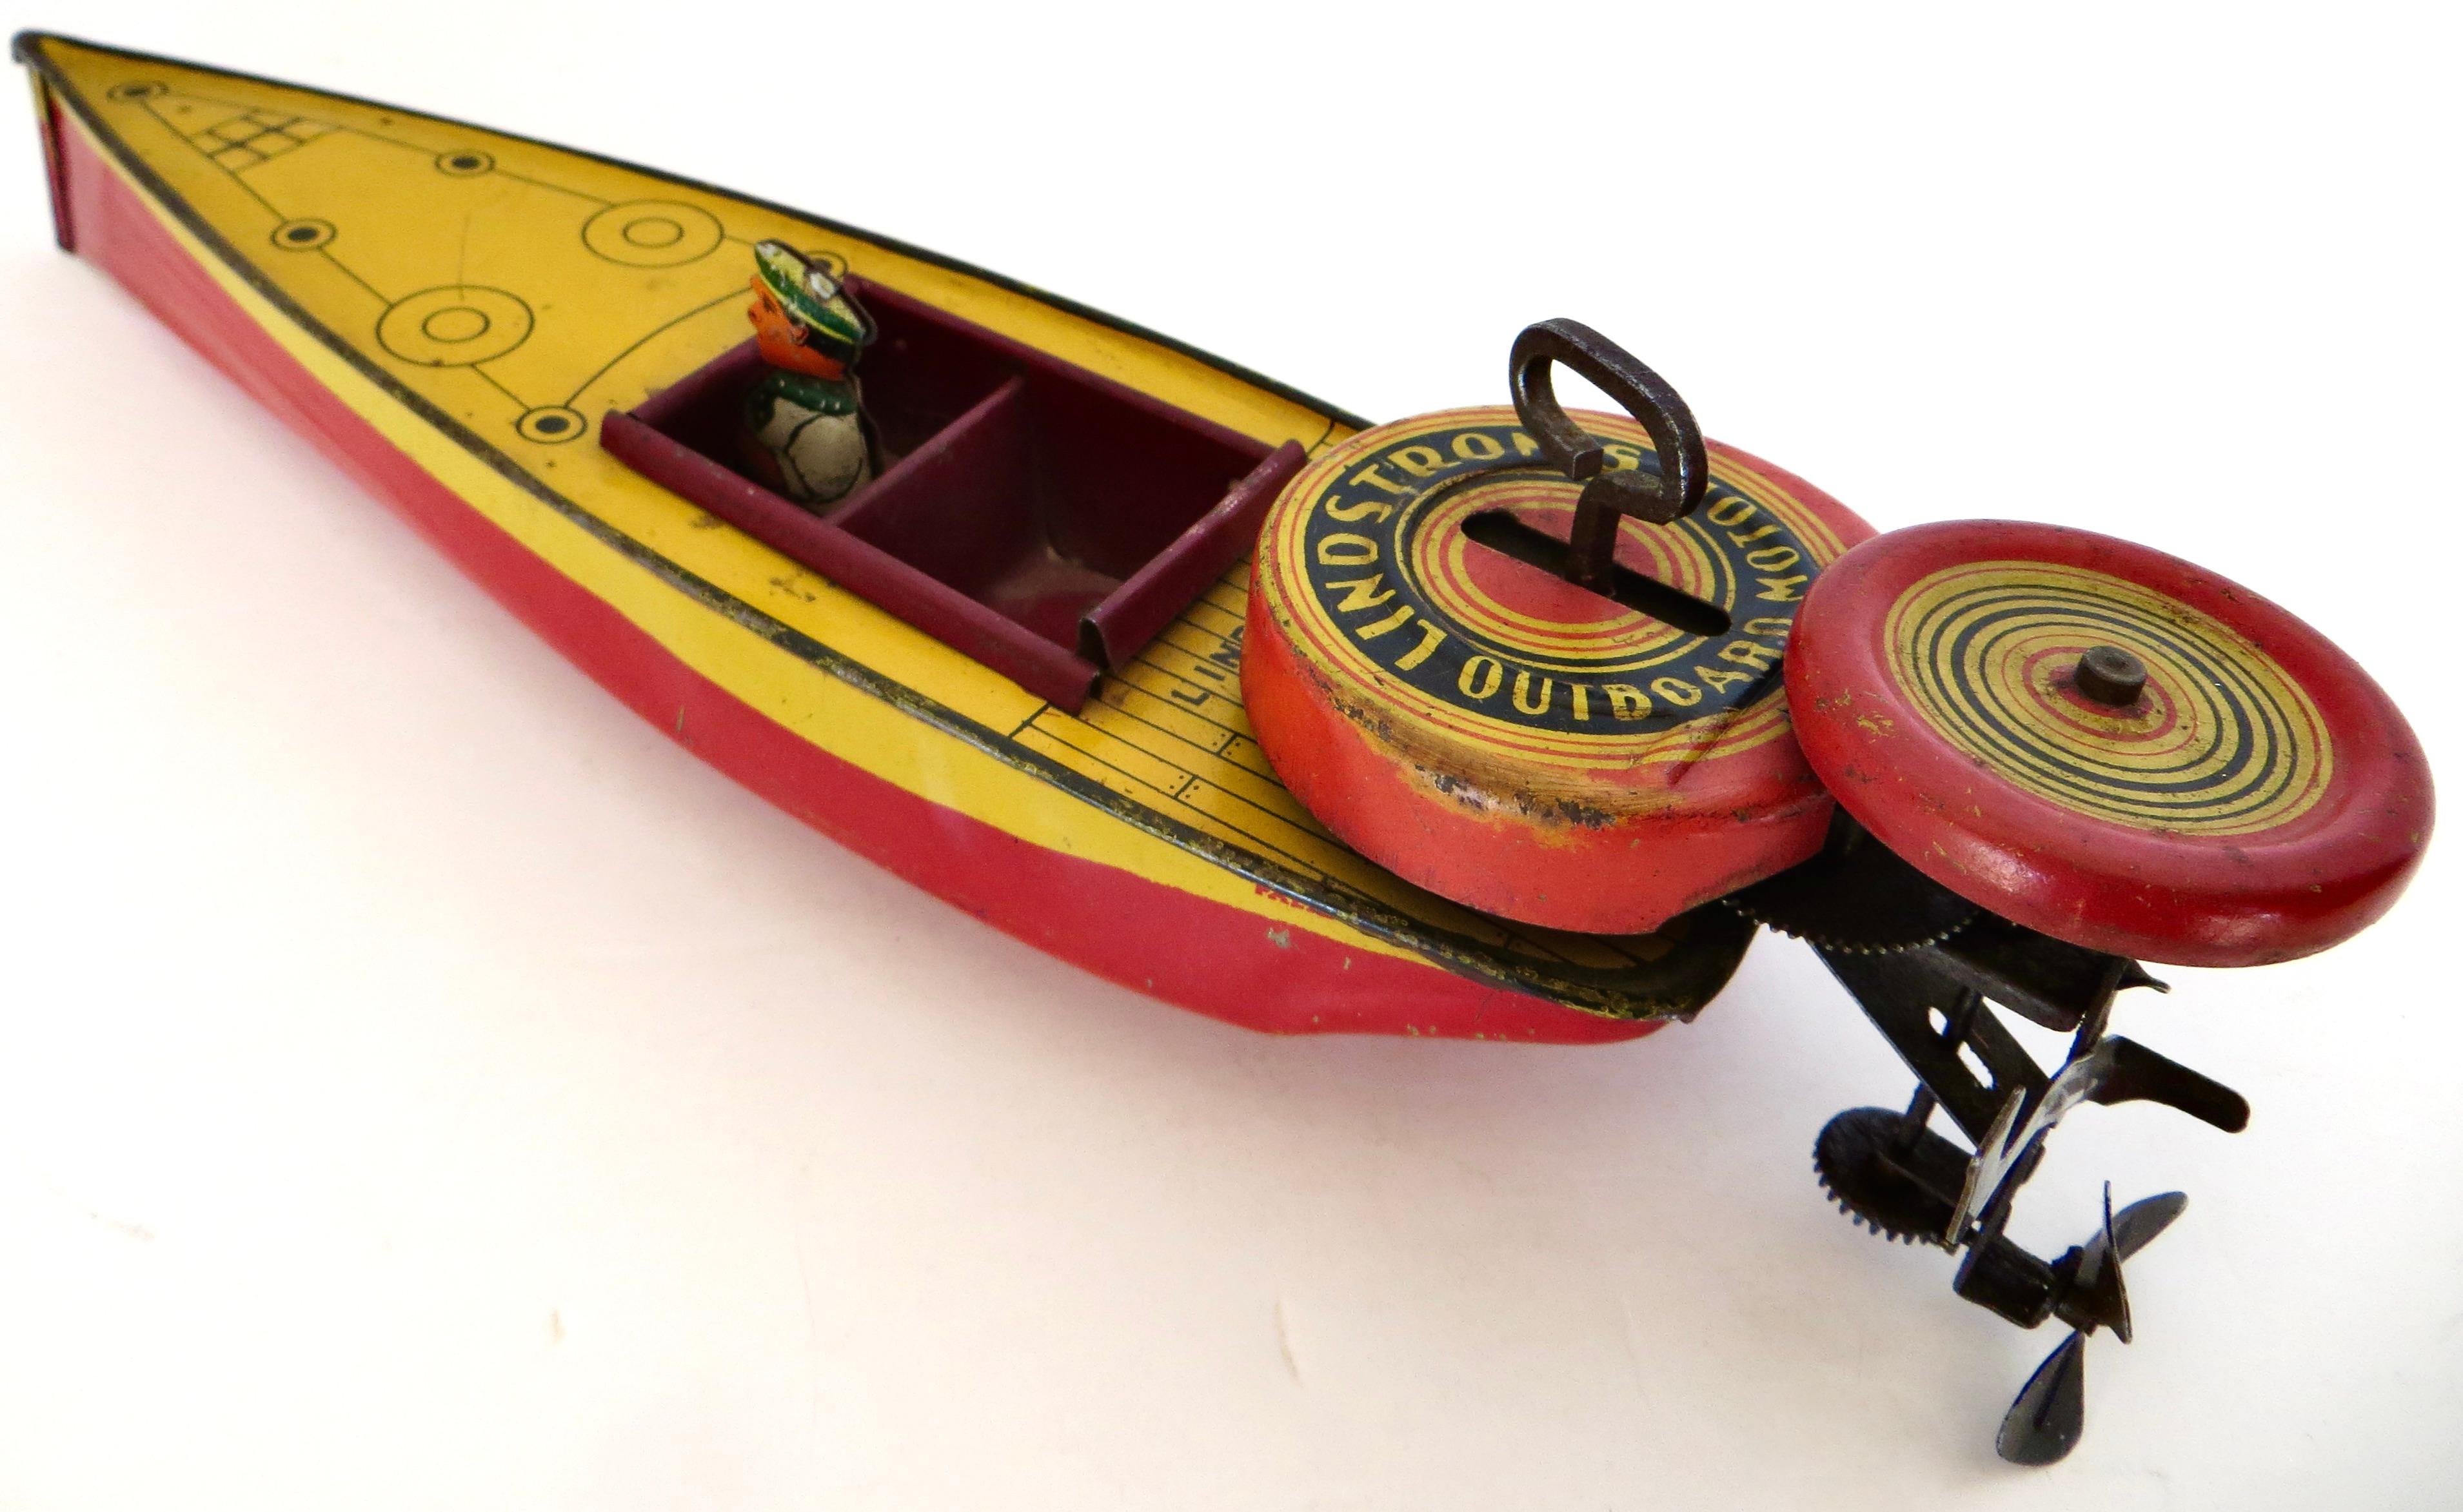 Vintage toy speed boat manufactured by the Lindstrom Toy Company of Bridgeport Connecticut, circa 1933 or earlier; the Lindstrom company having been founded in 1913, made quality tin wind-up toys until World War II when they went out of business.